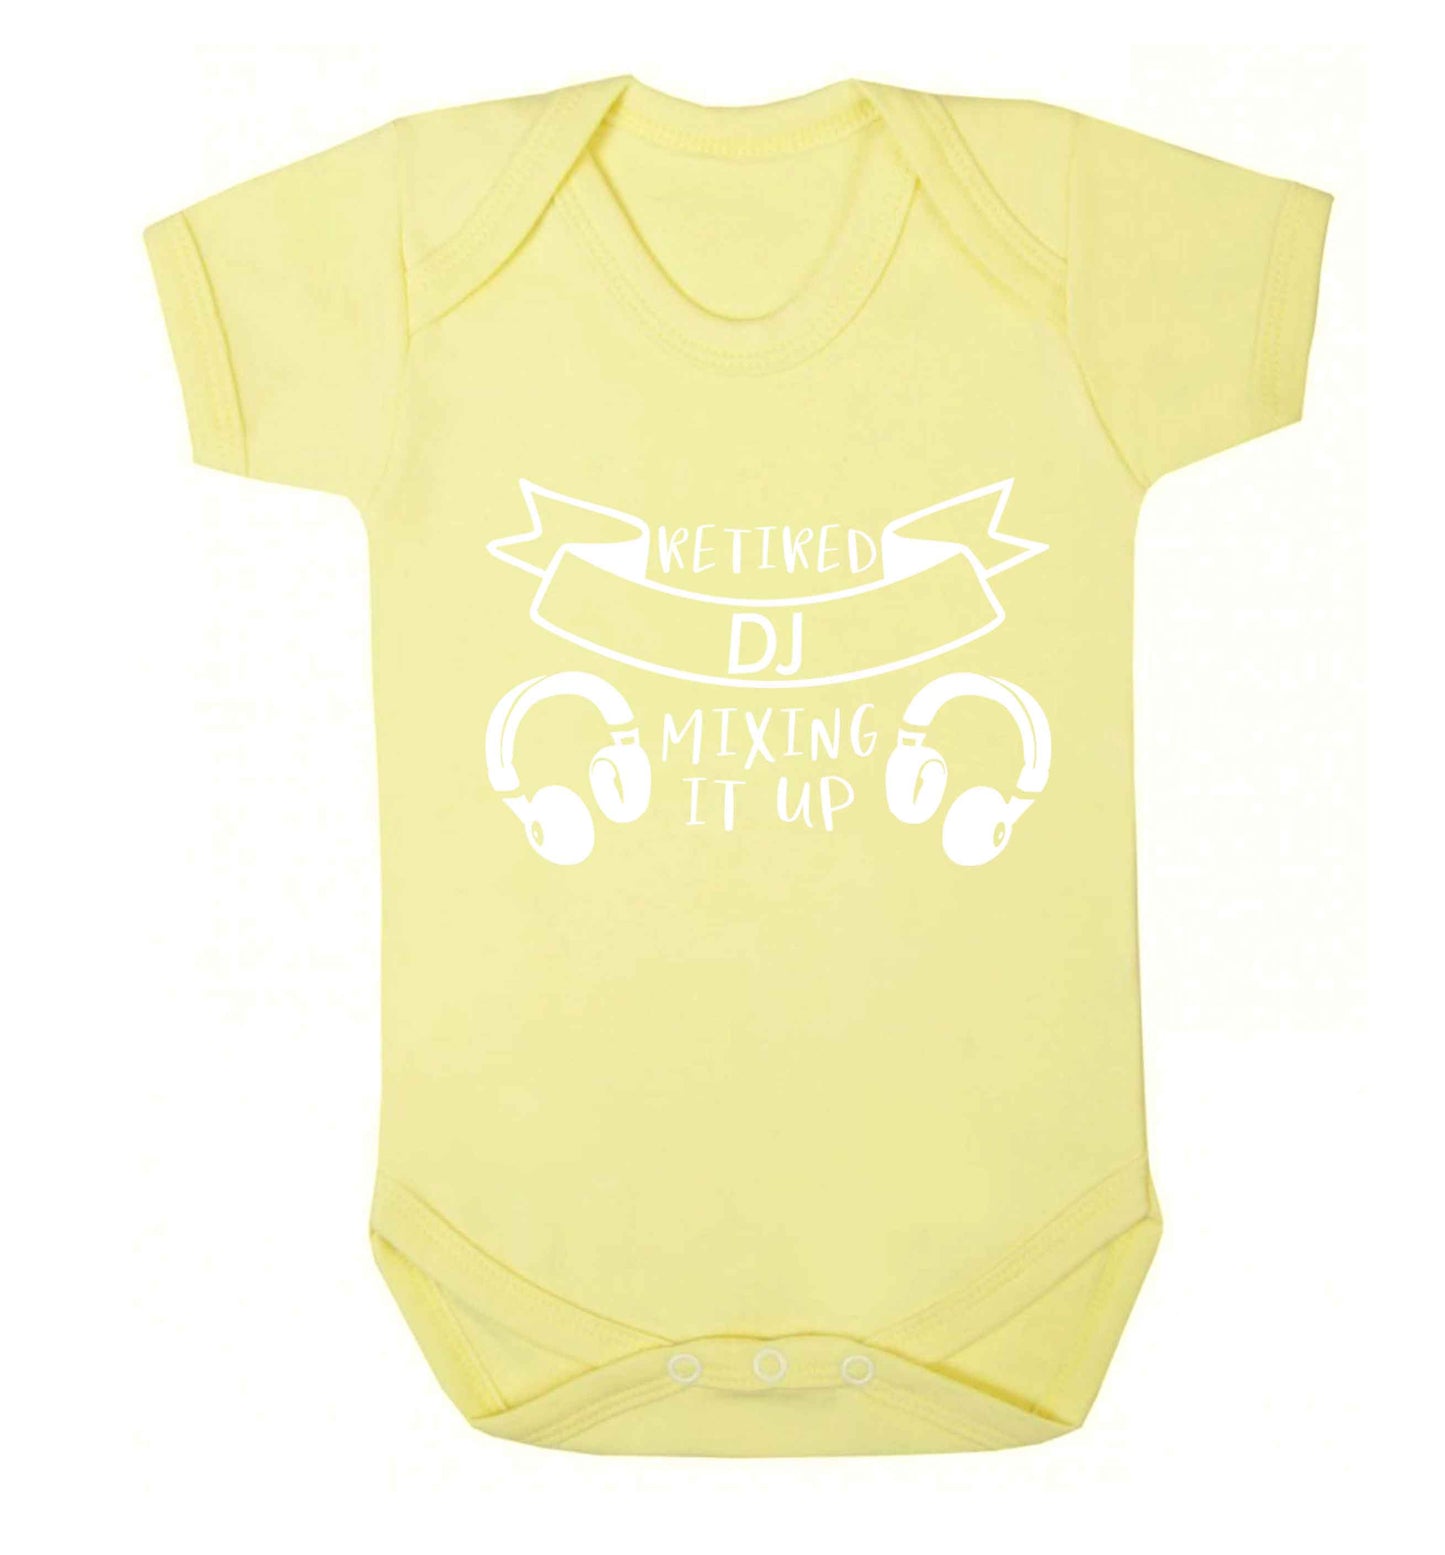 Retired DJ mixing it up Baby Vest pale yellow 18-24 months